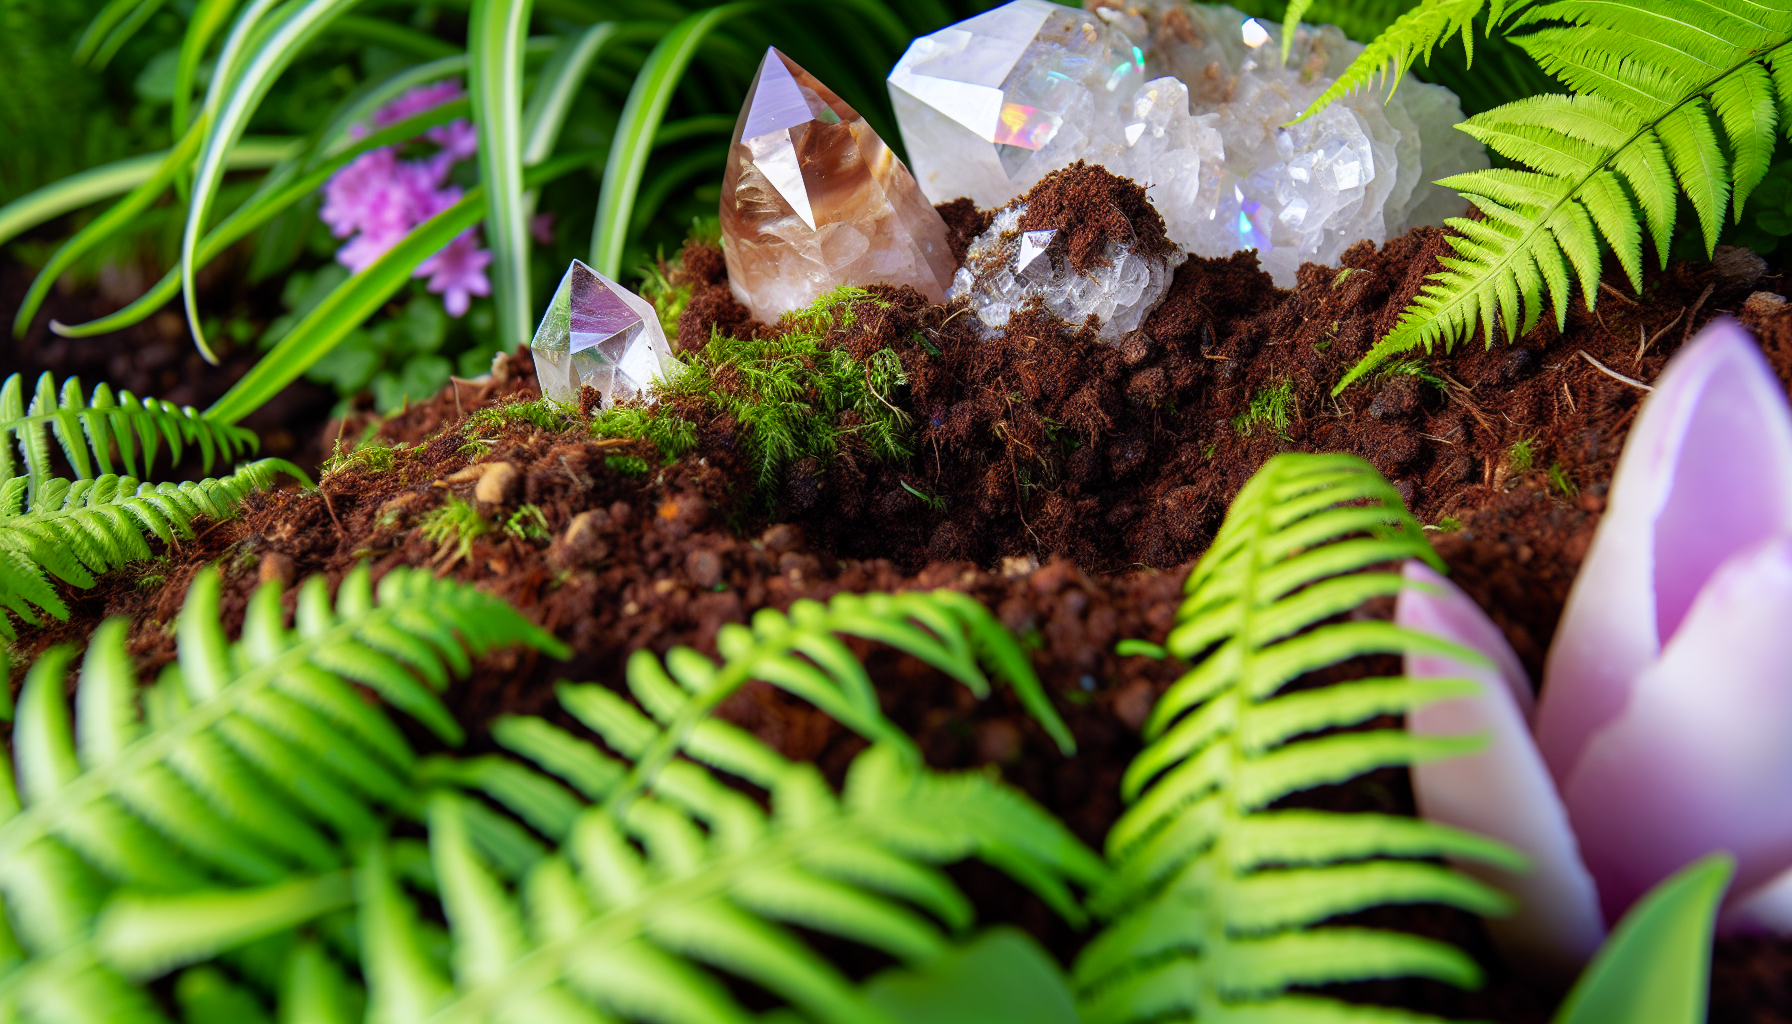 Crystals buried in the earth with greenery in the background